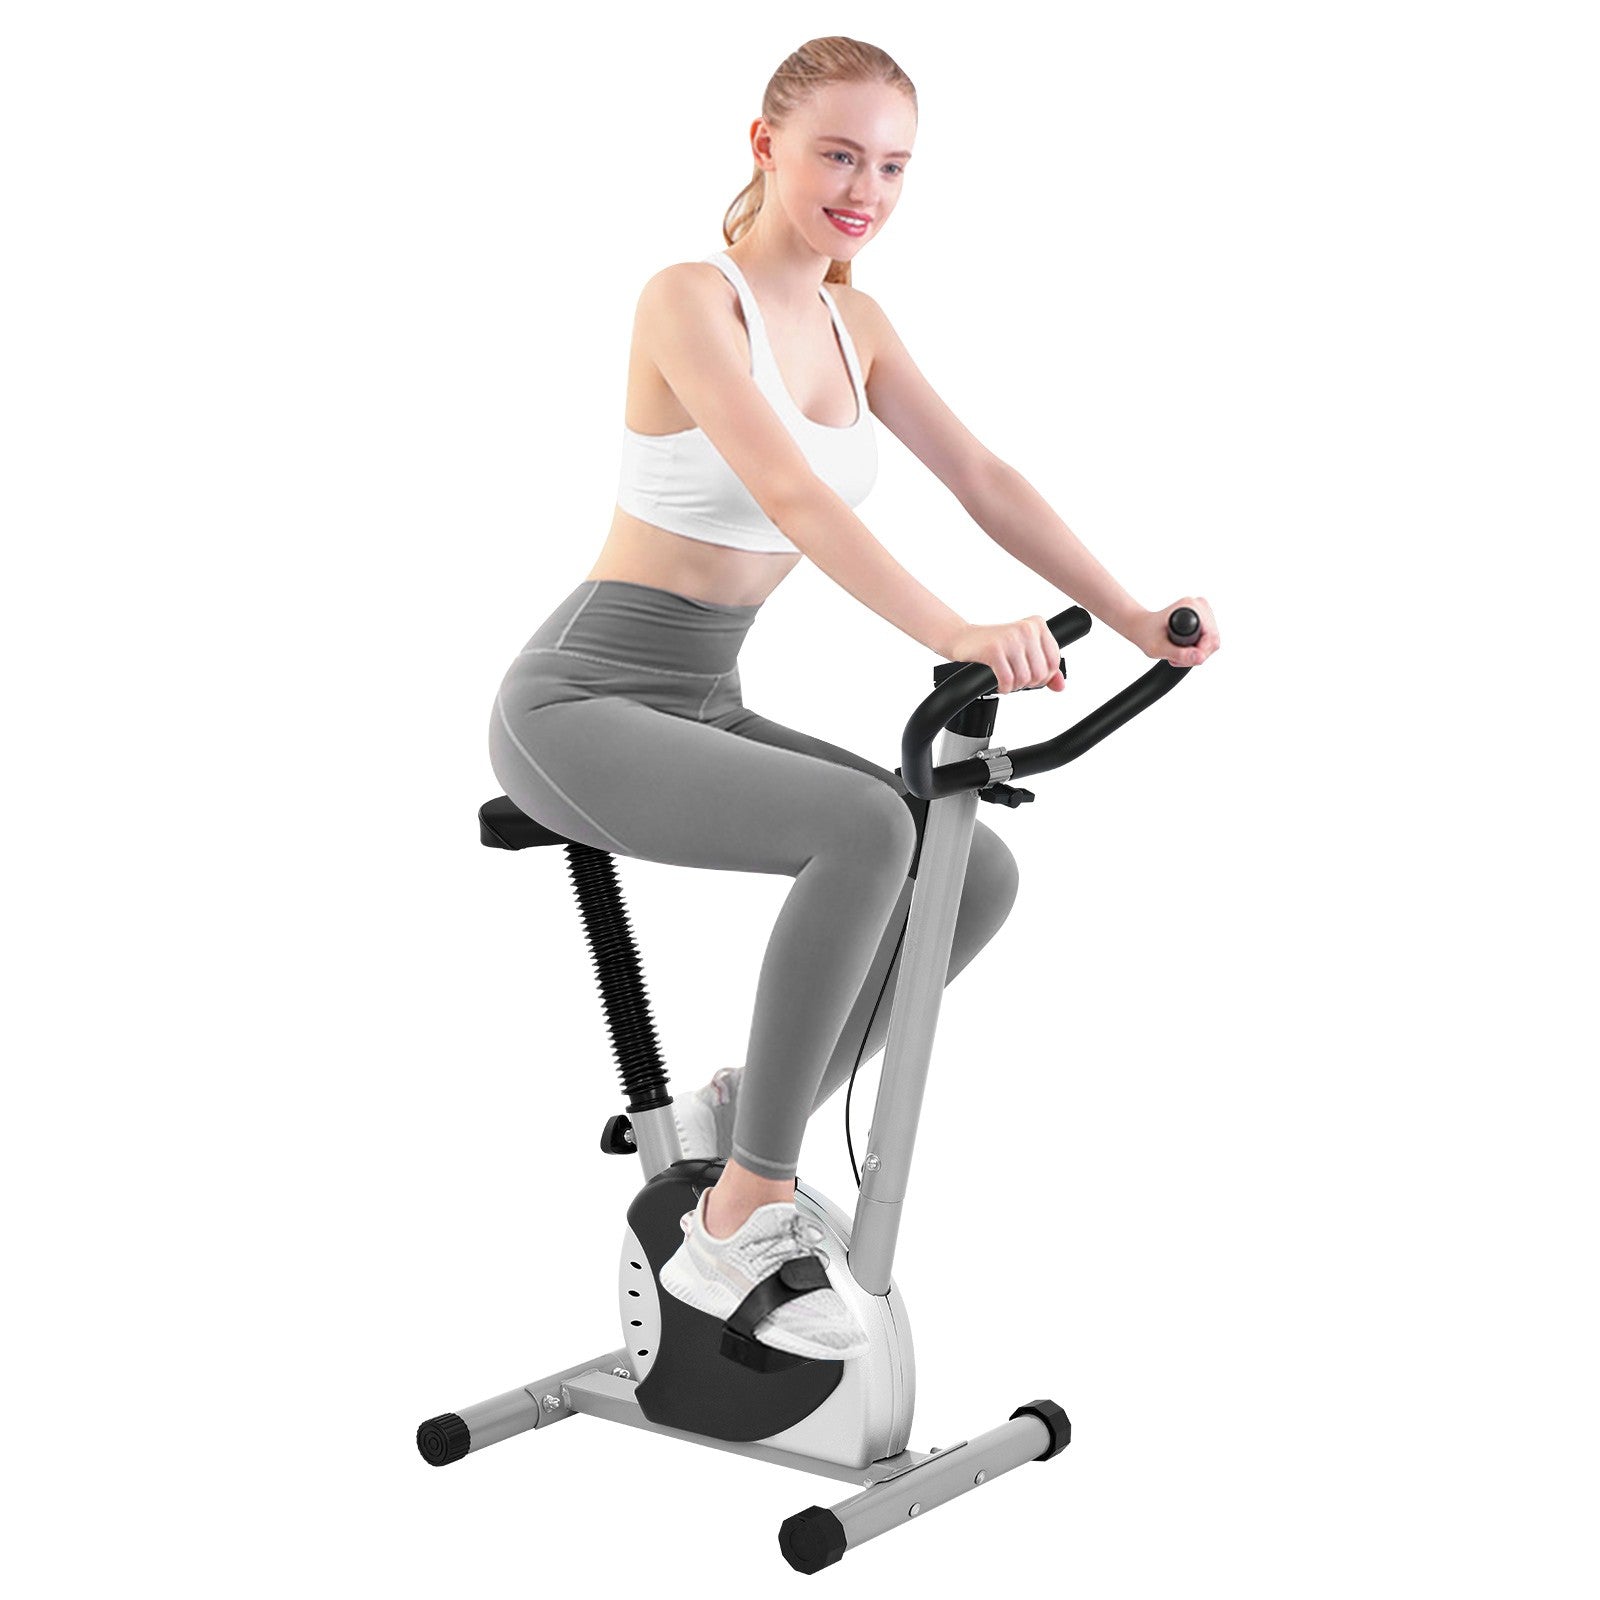 Bicycle Cycling Exercise Bike Stationary Fitness Cardio Indoor Home Workout Gym - Plushlegacy